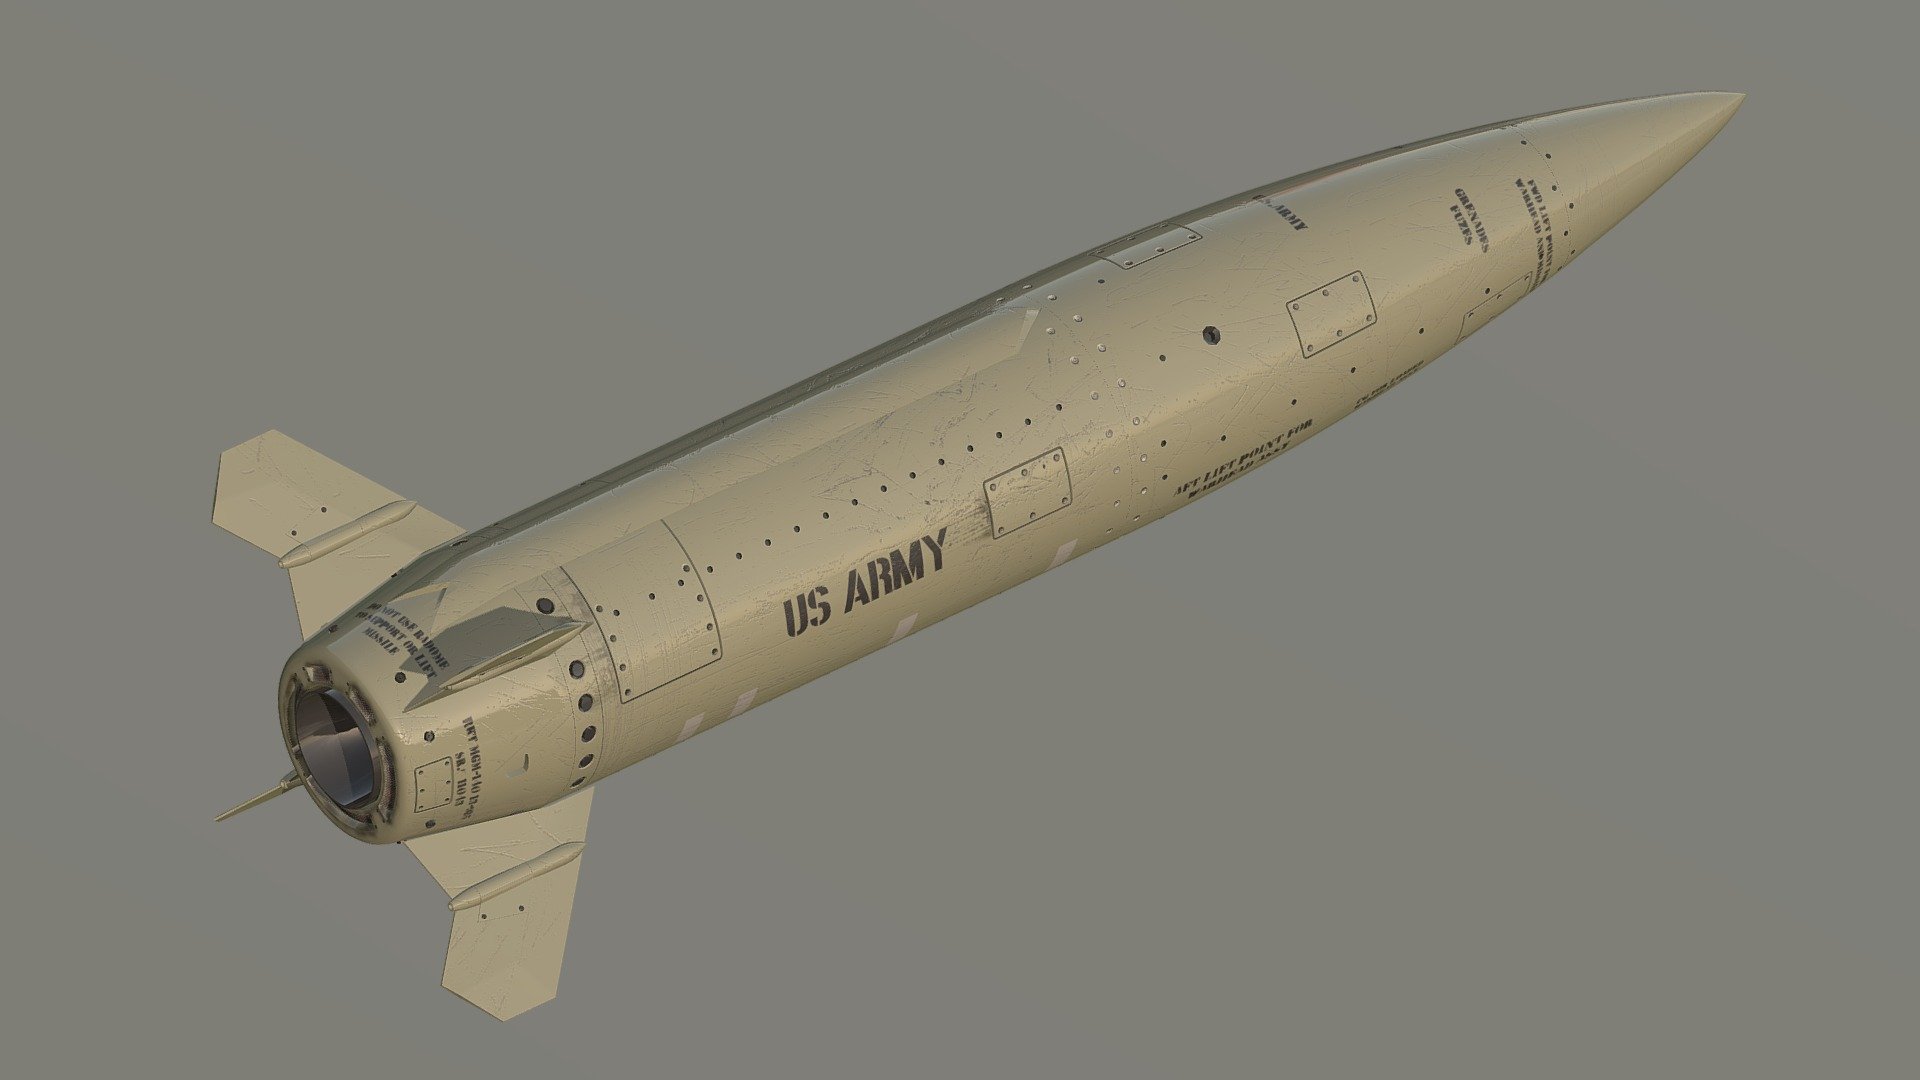 High-detailed, photorealistic model by 3d_molier International. Link to the model: -link removed- - Lockheed Martin MGM-140 ATACMS missile - 3D model by Jeyhun1985 3d model